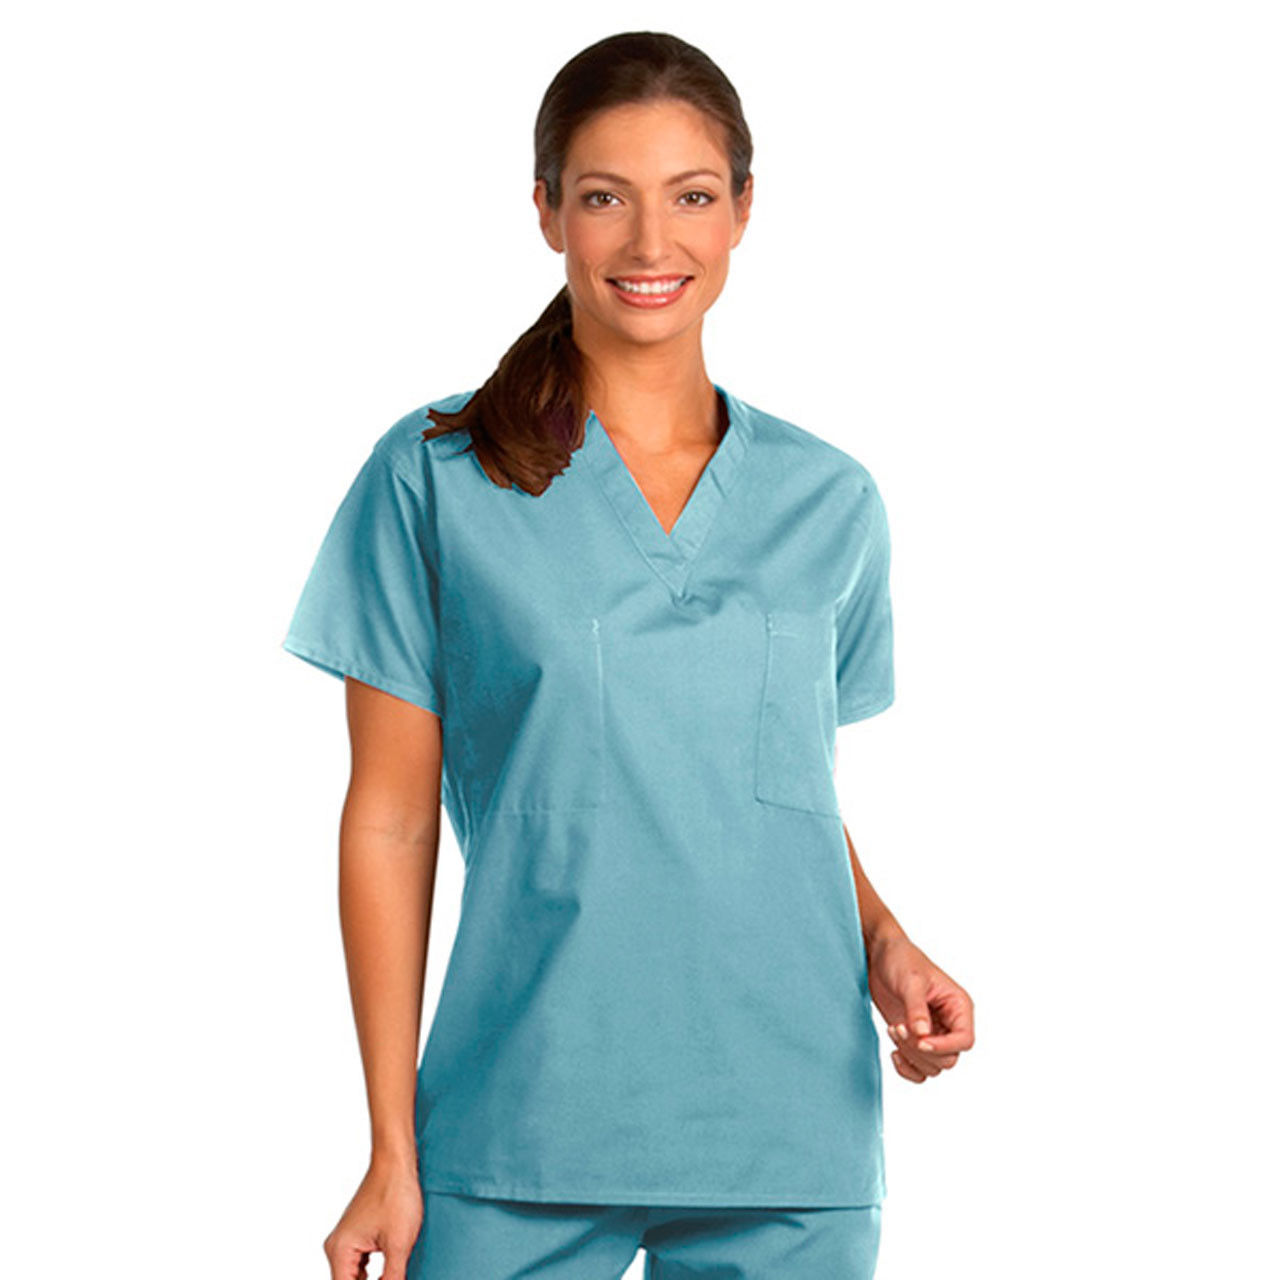 Can you identify what the text is detailing about the surgical scrubs?